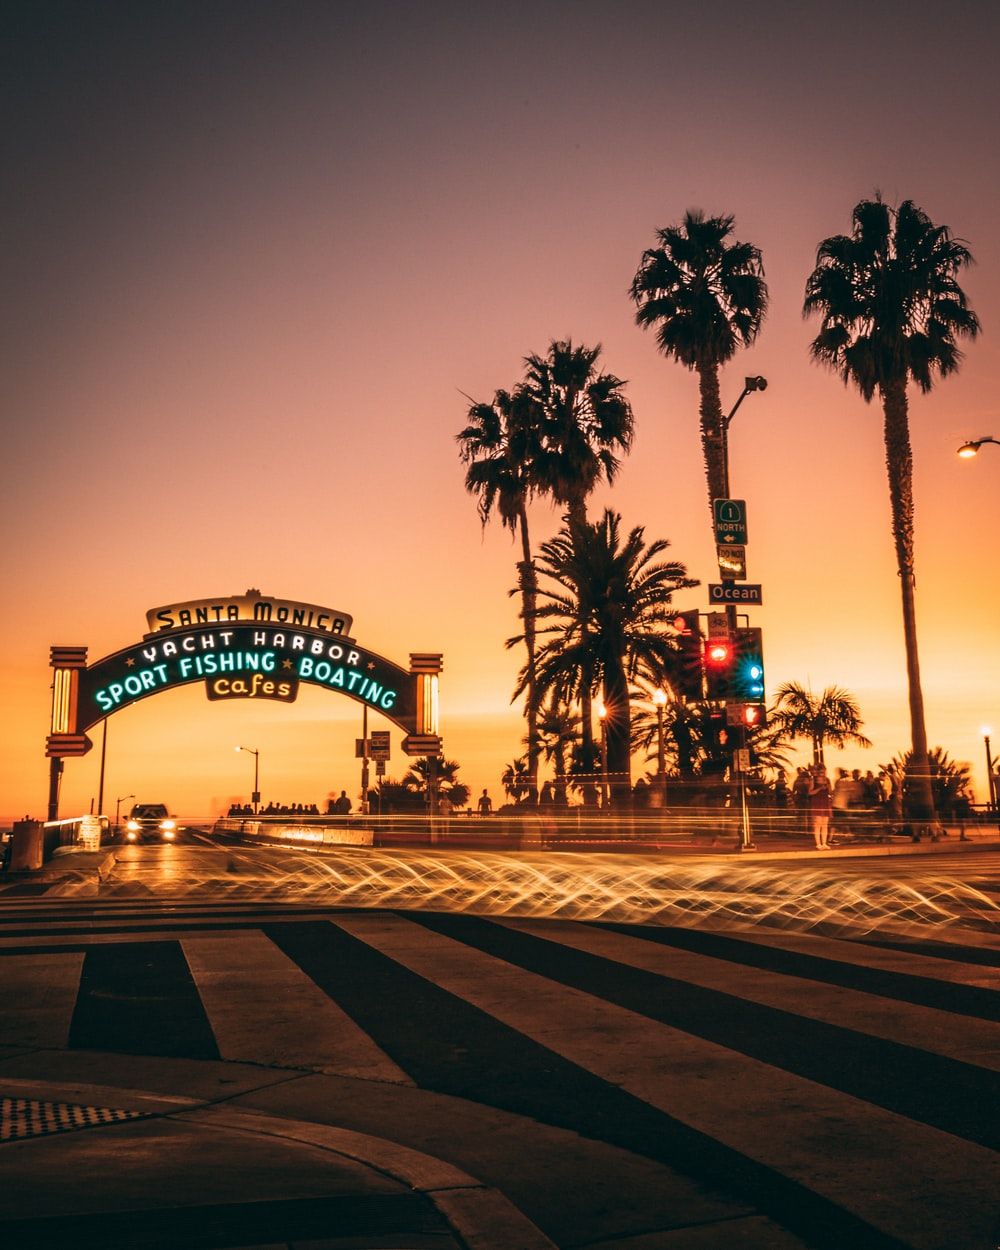 4K Los Angeles Sunset Wallpapers